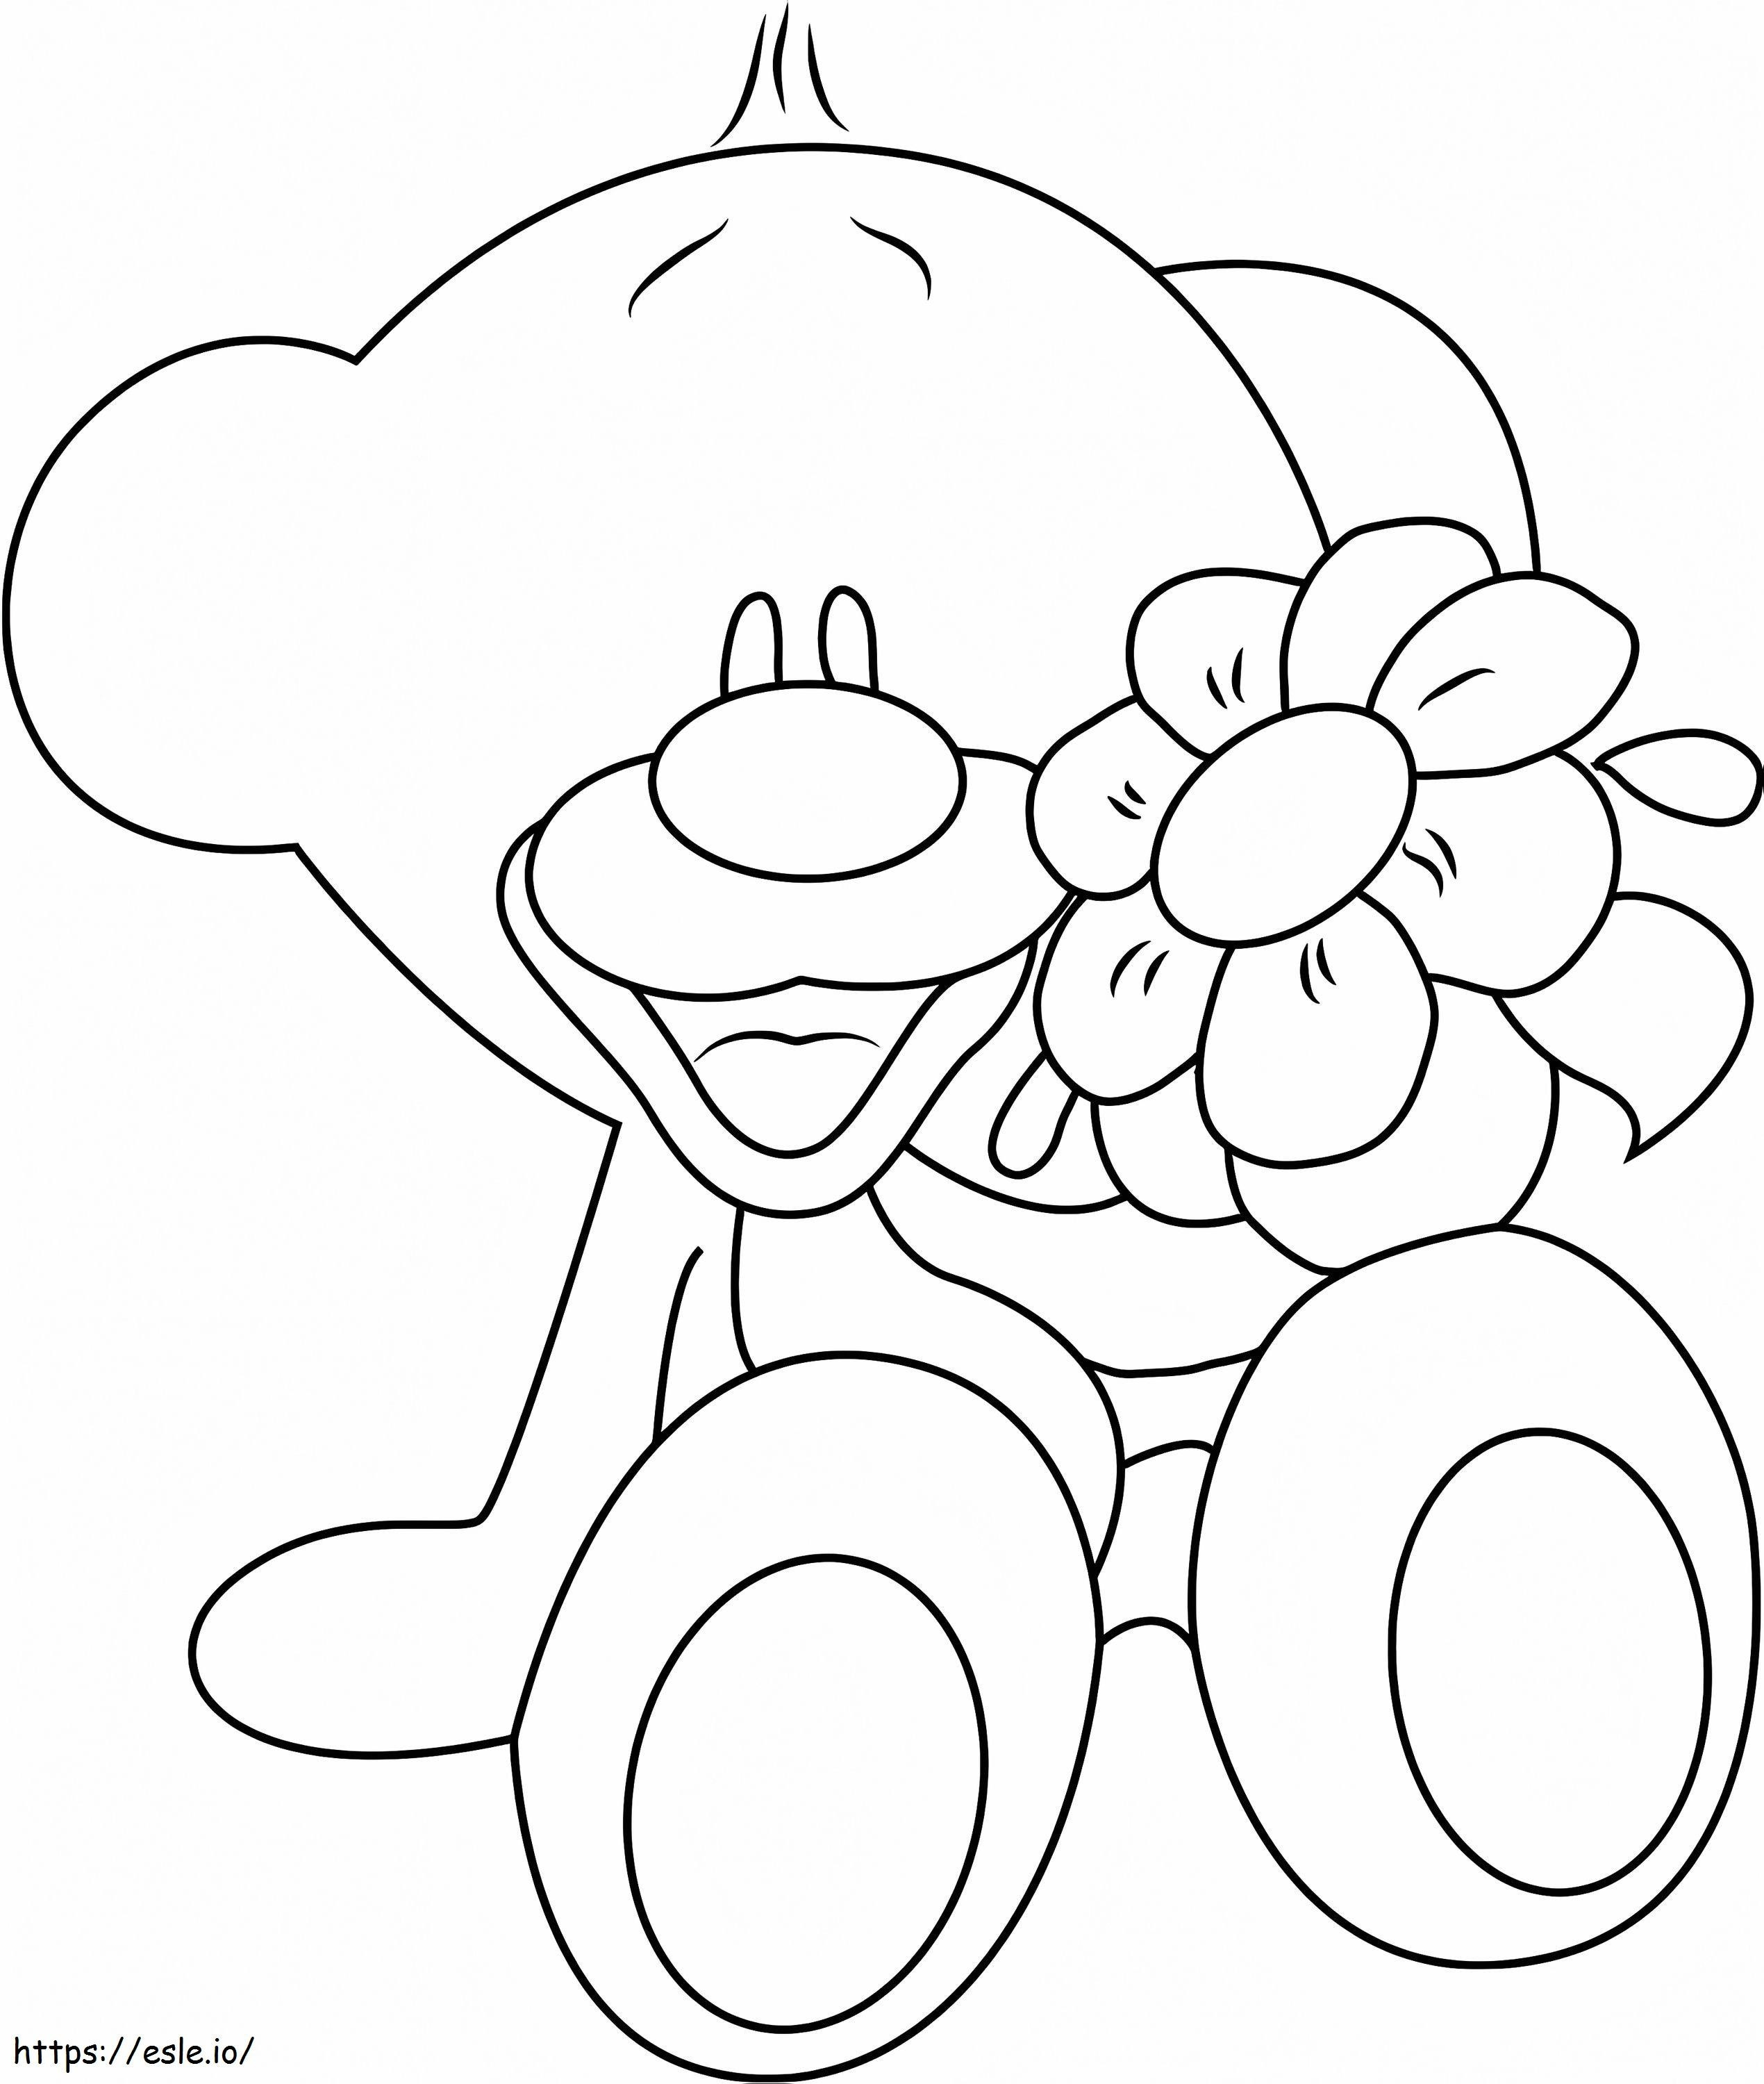 Pimboli And Flower coloring page